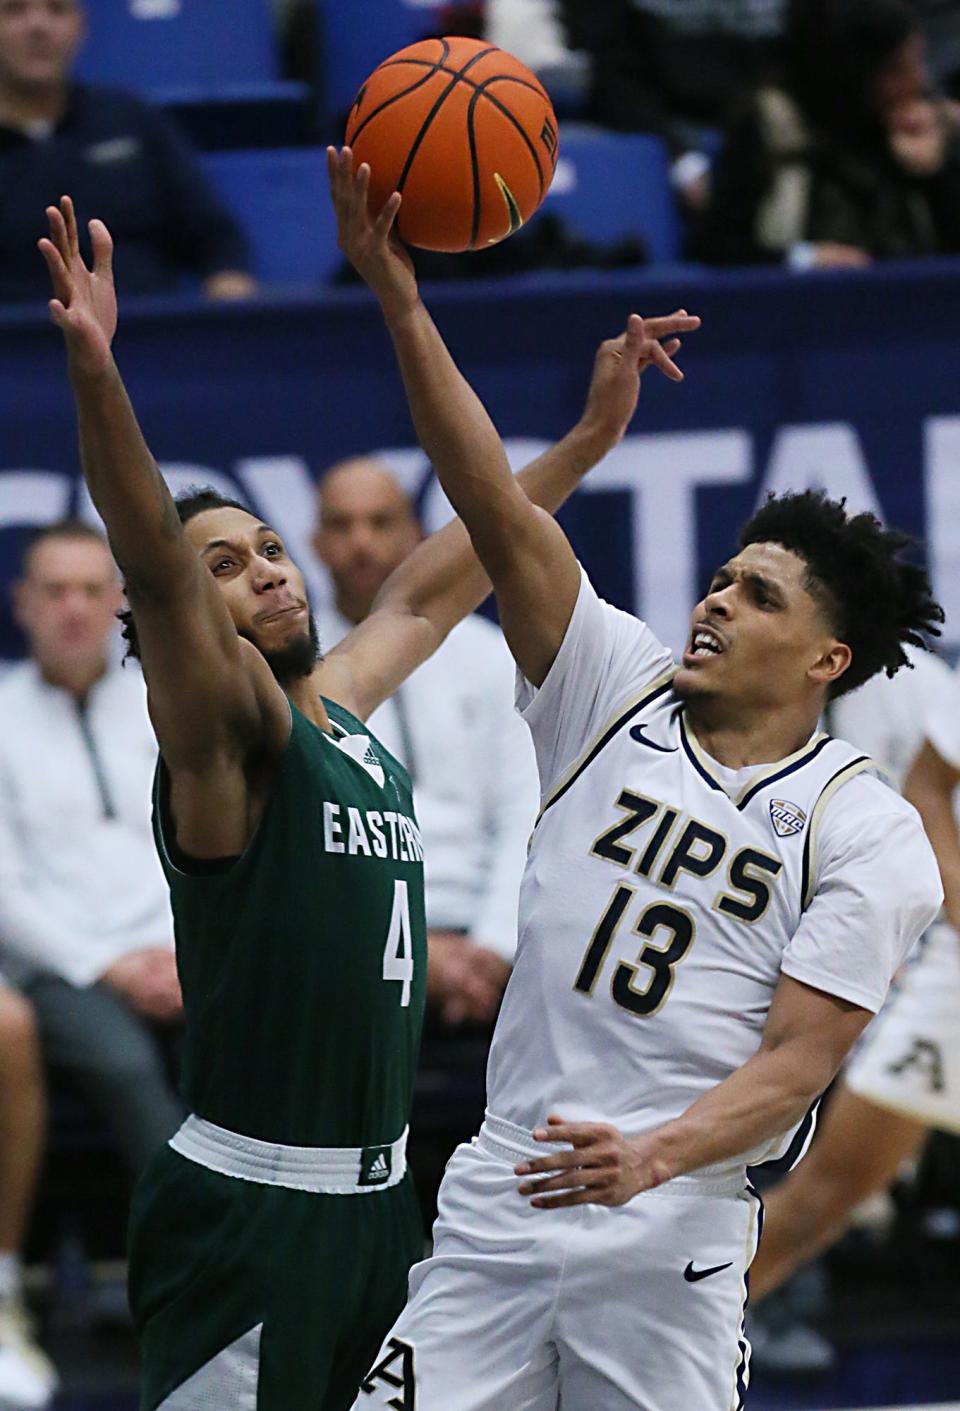 Eastern Michgan's Jalin Billingsley guards Akron's Xavier Castaneda as he shoots during their MAC game at the University of Akron's James A. Rhodes Arena on Friday. The Zips beat the Eagles 104 to 67.